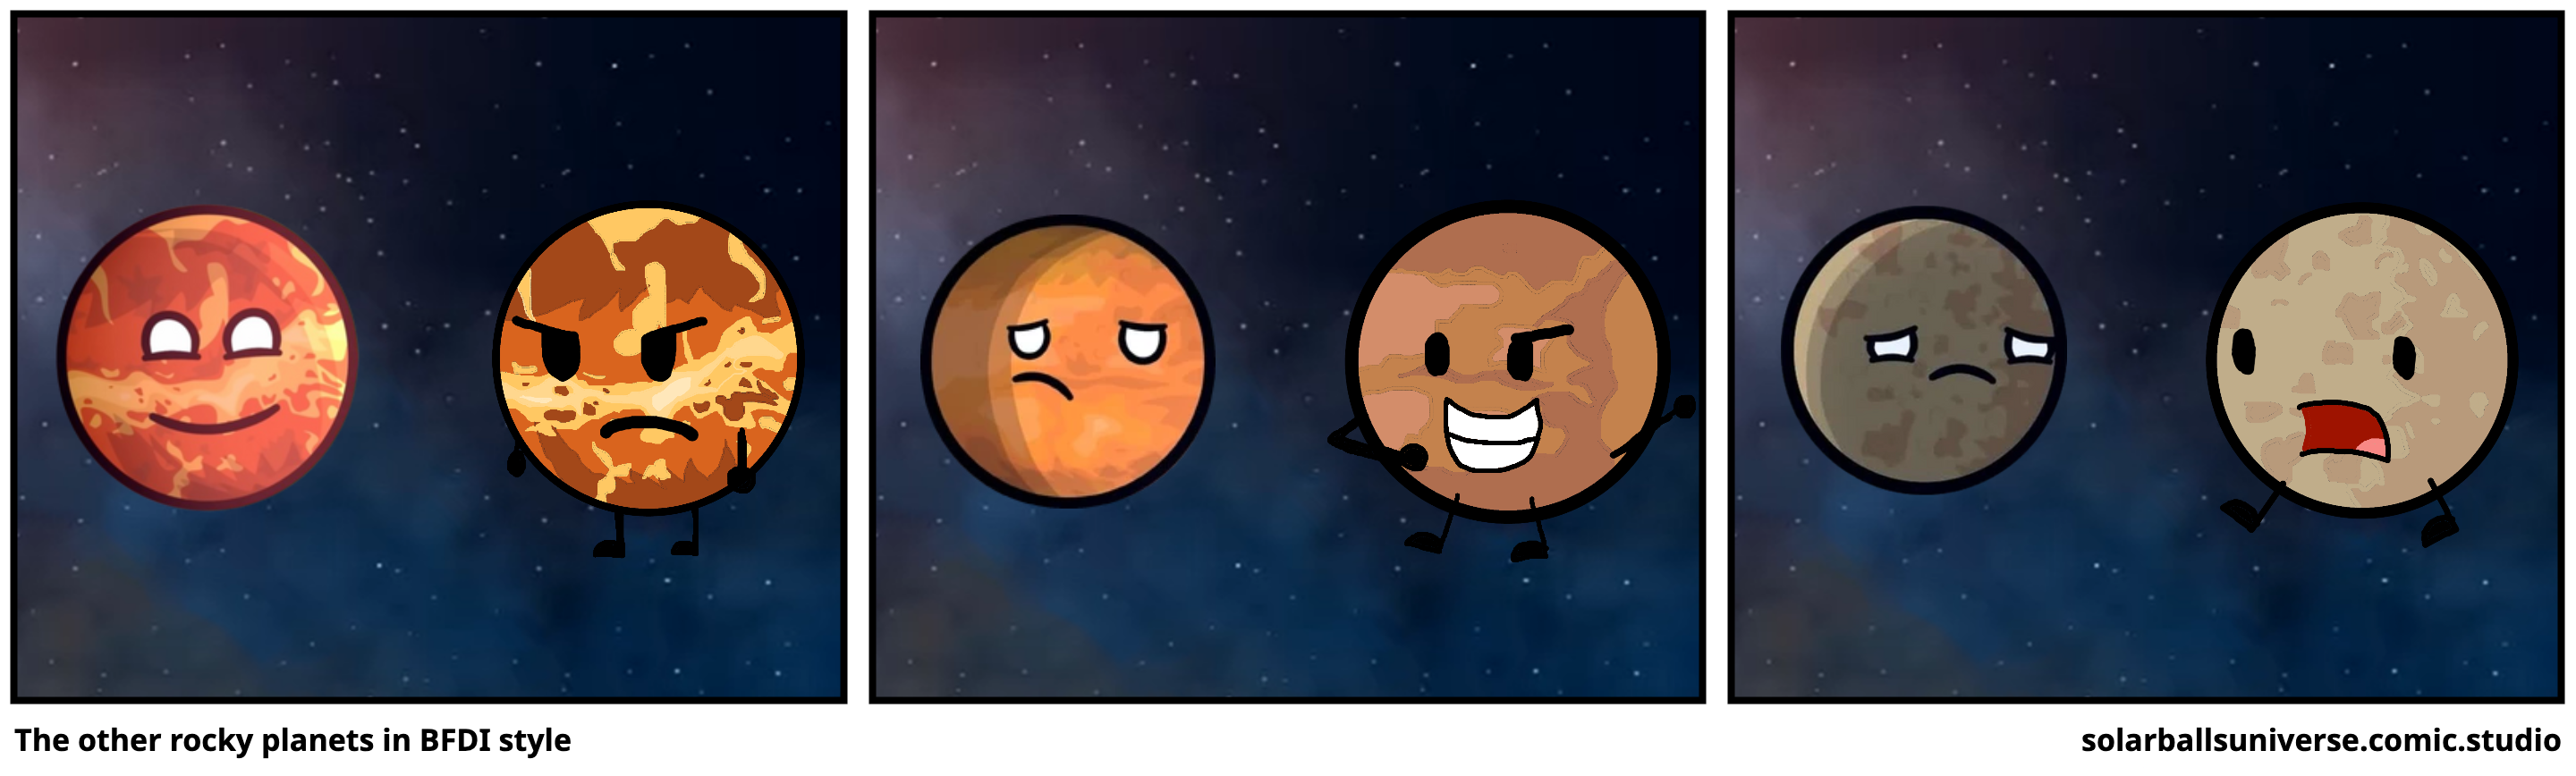 The other rocky planets in BFDI style